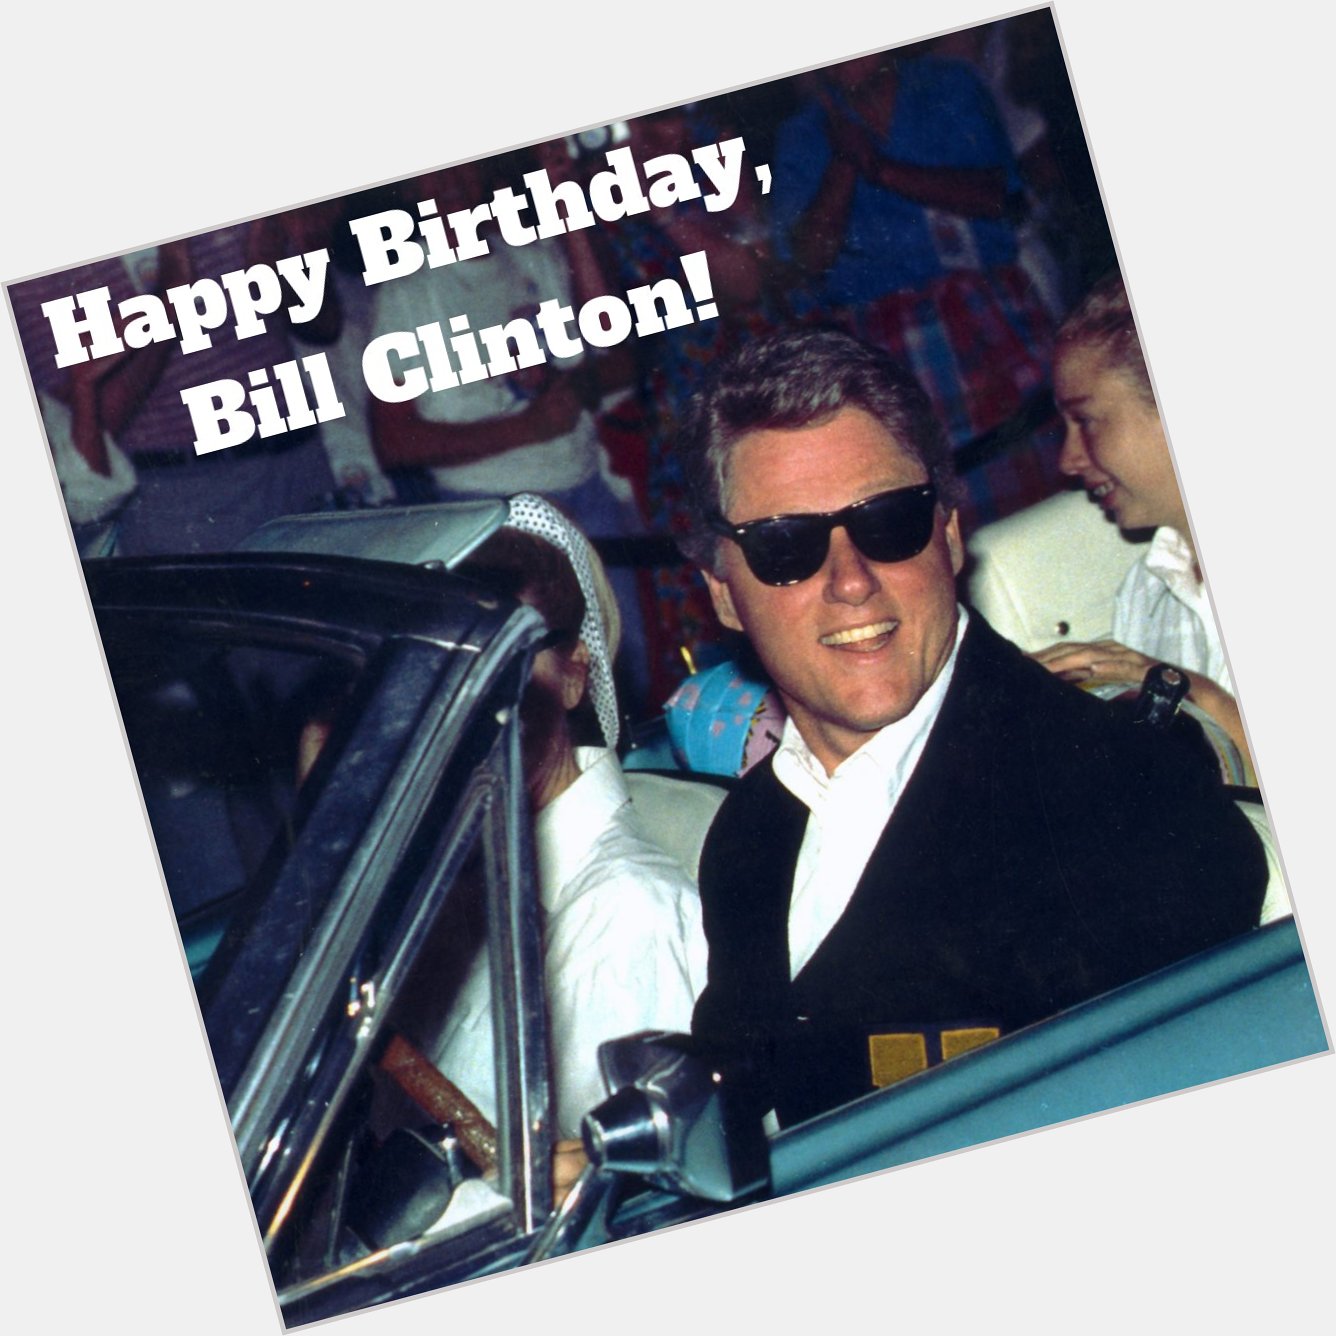 HAPPY BIRTHDAY, Bill CLINTON! The former president is also scheduled to speak tonight at the DNC. 